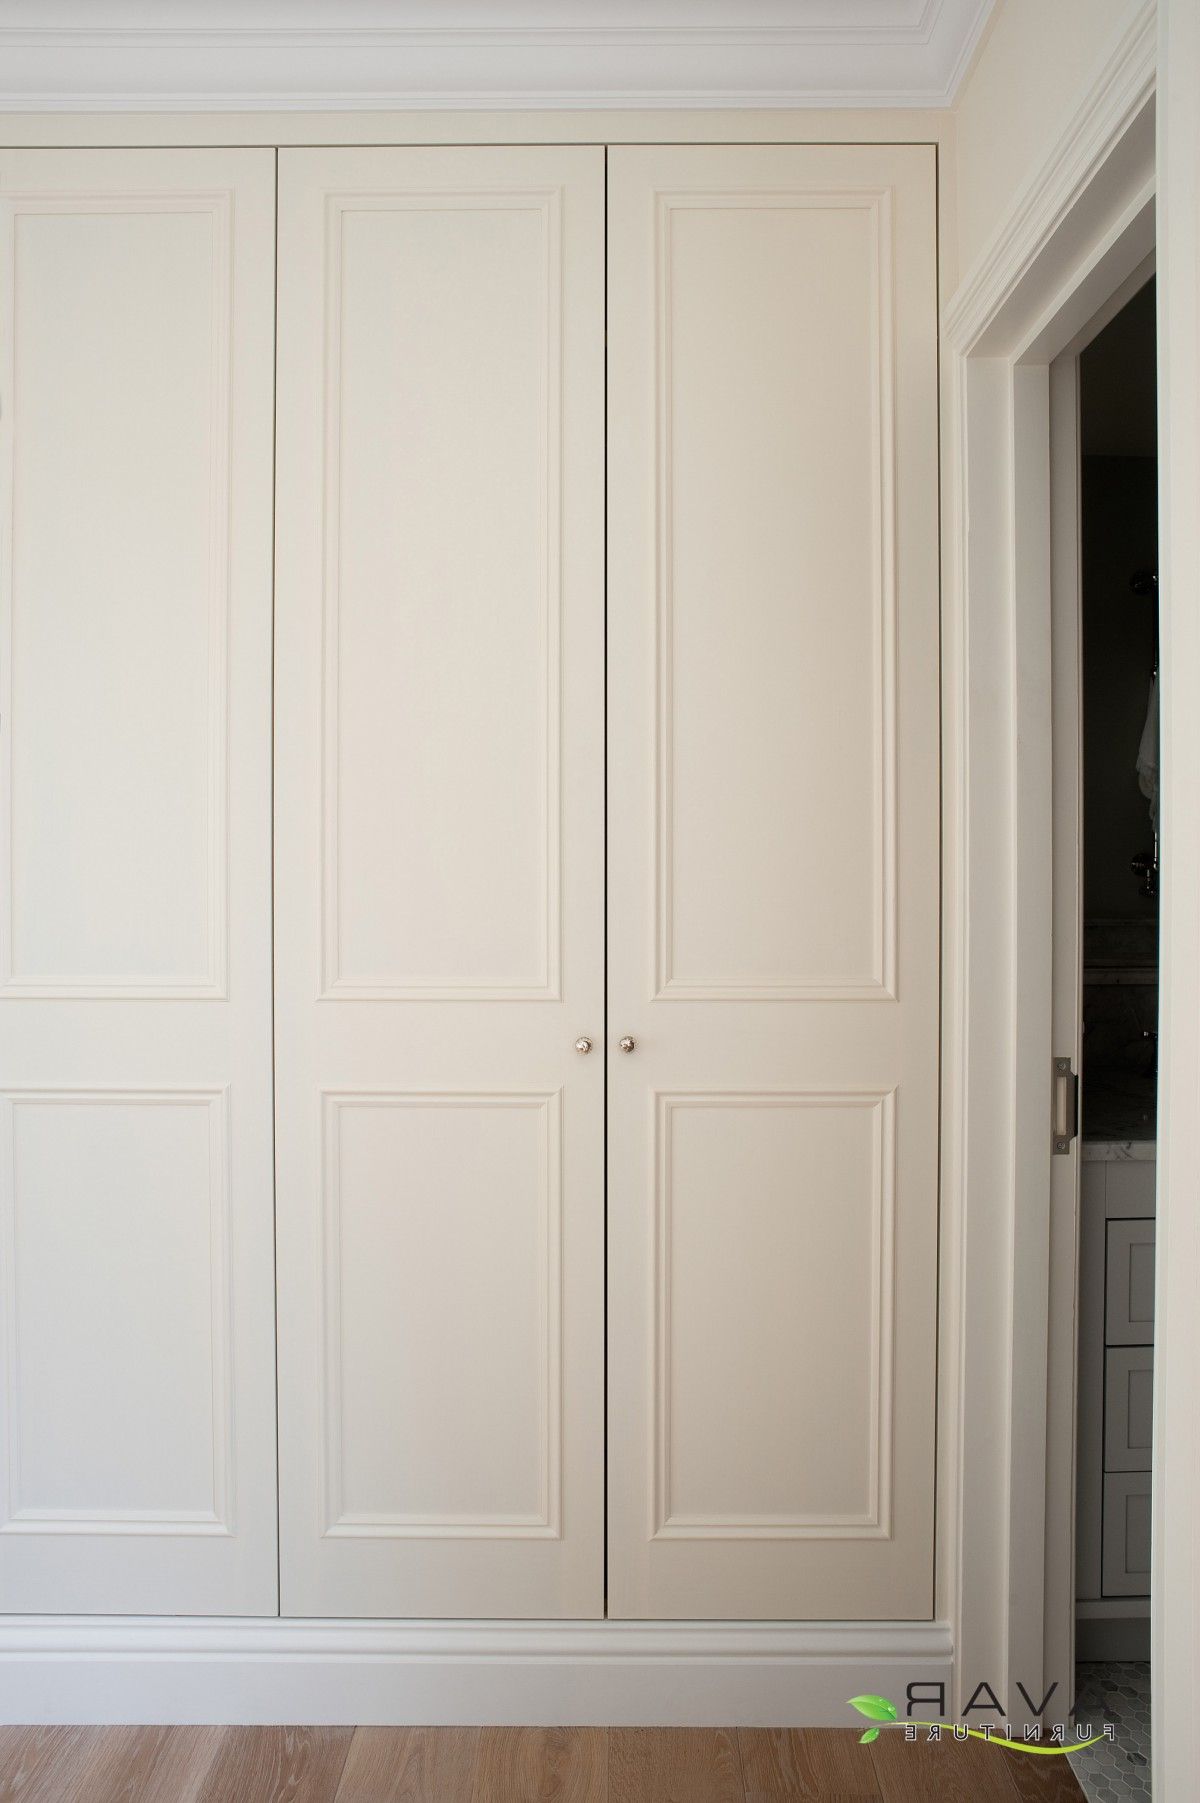 Fitted Wardrobe Ideas Gallery 28 | North London, Uk | Avar Furniture With Regard To French Style Fitted Wardrobes (Gallery 14 of 20)